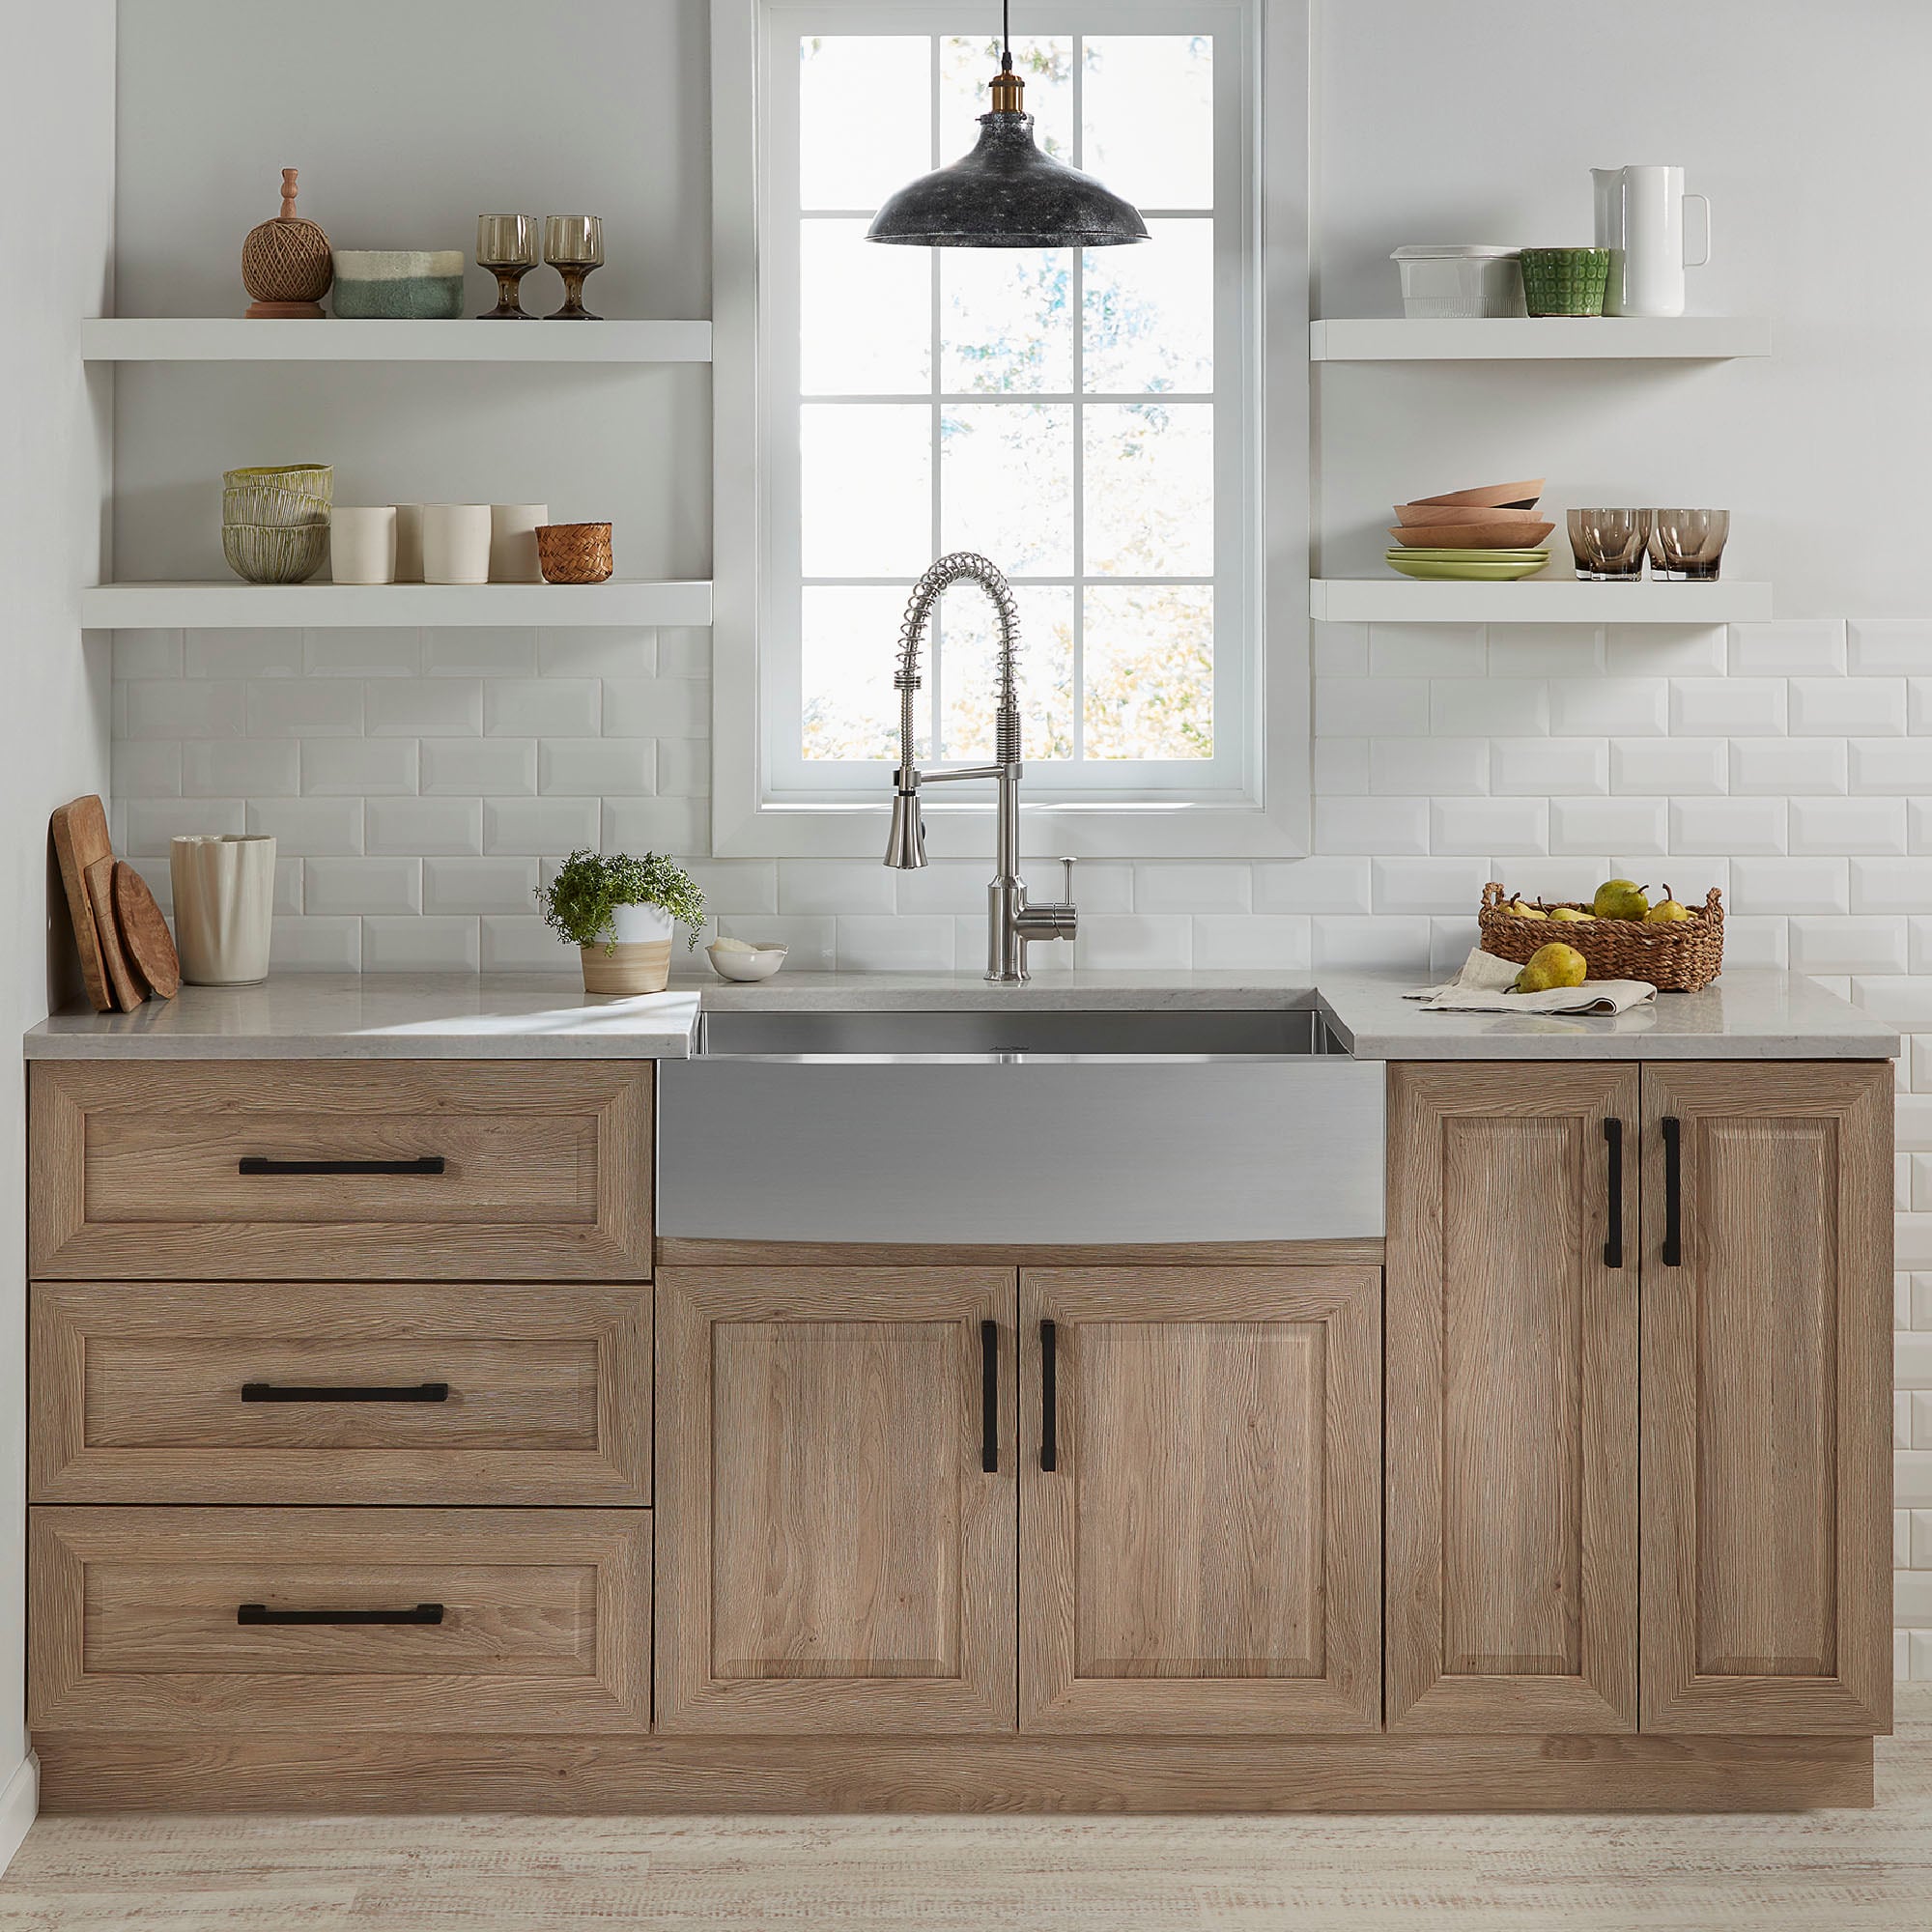 10 Drool Worthy Farmhouse Sinks For Kitchens 43 Off